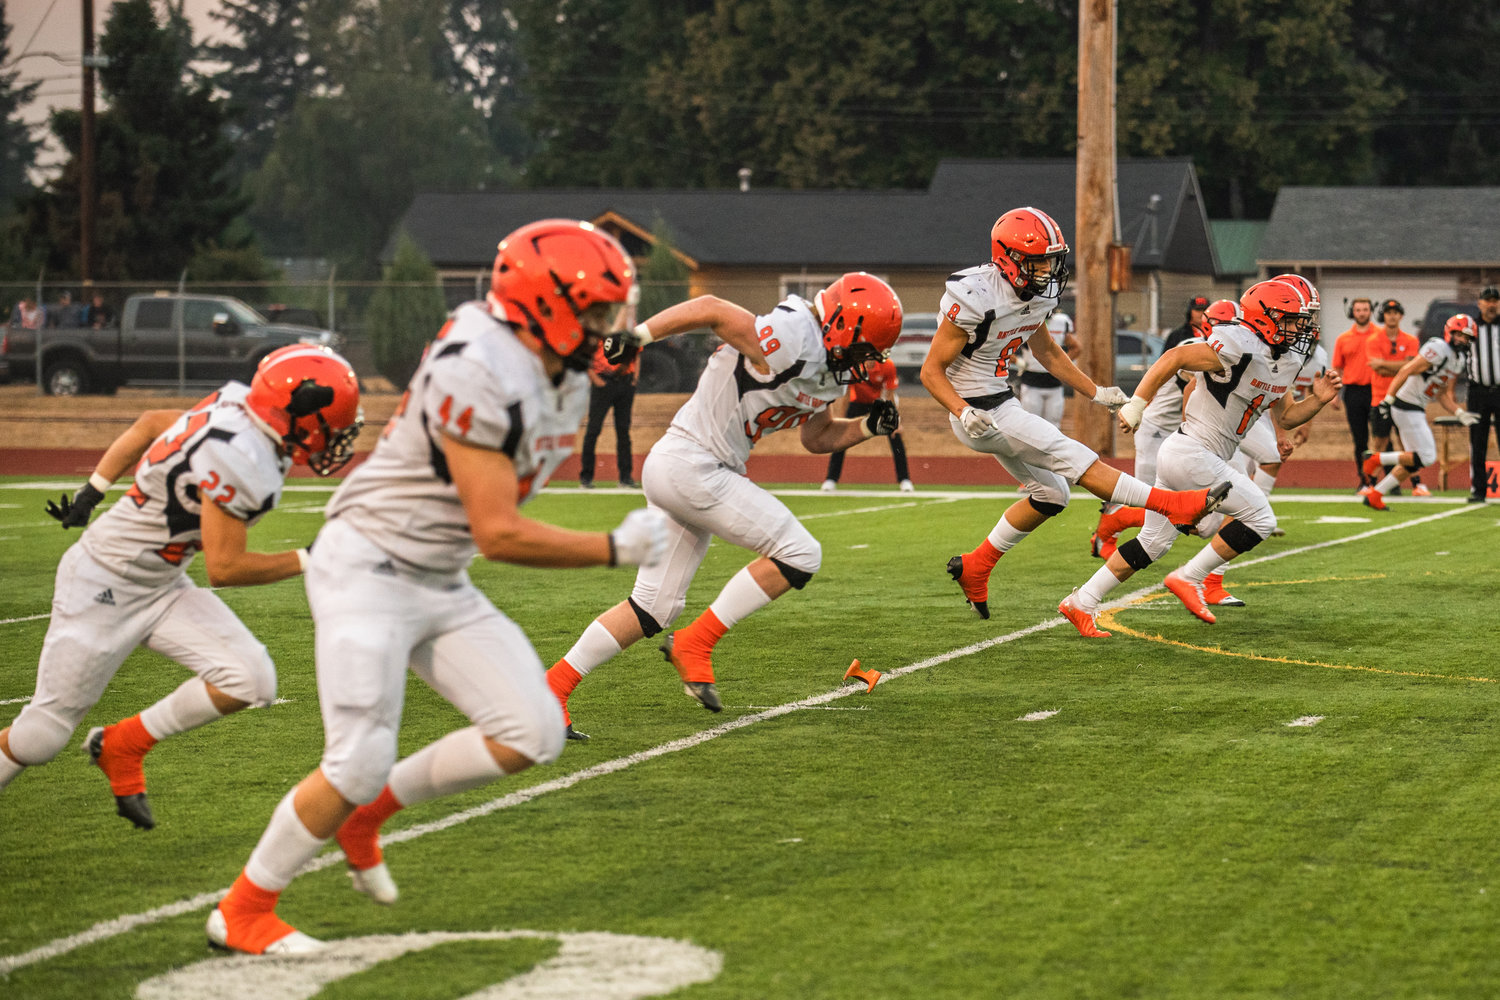 Battle Ground Tigers kick the football and prepare to run up the field on Friday night during an away game in Centralia.